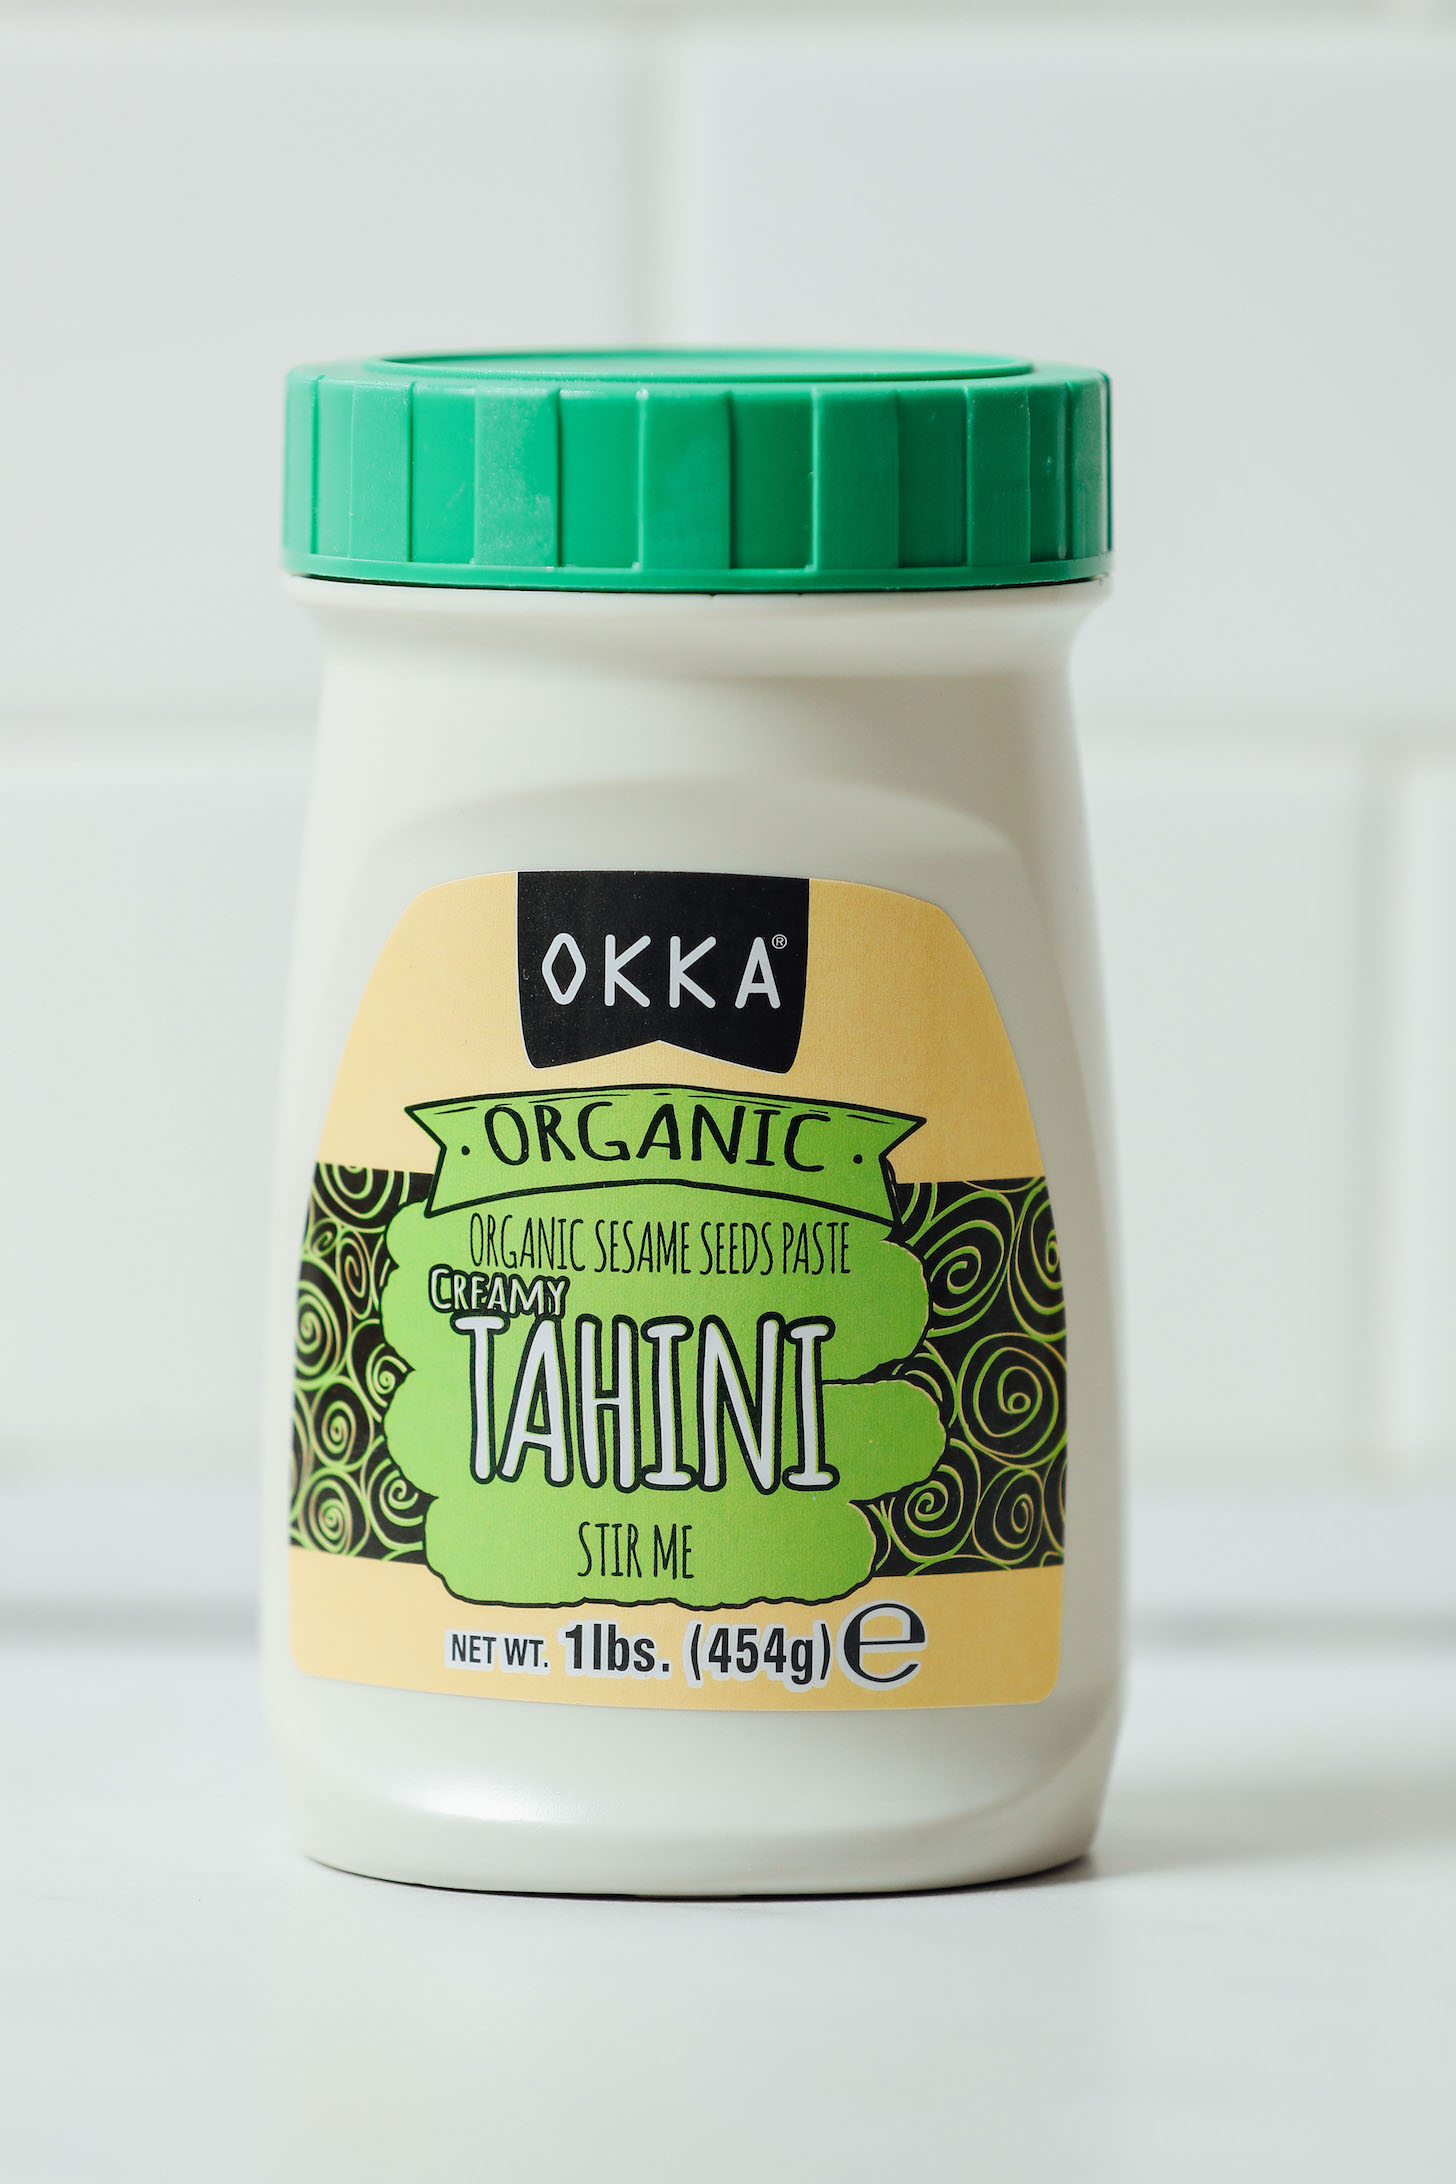 Jar of Okka Organic Tahini for our review of the Best Brands of Tahini